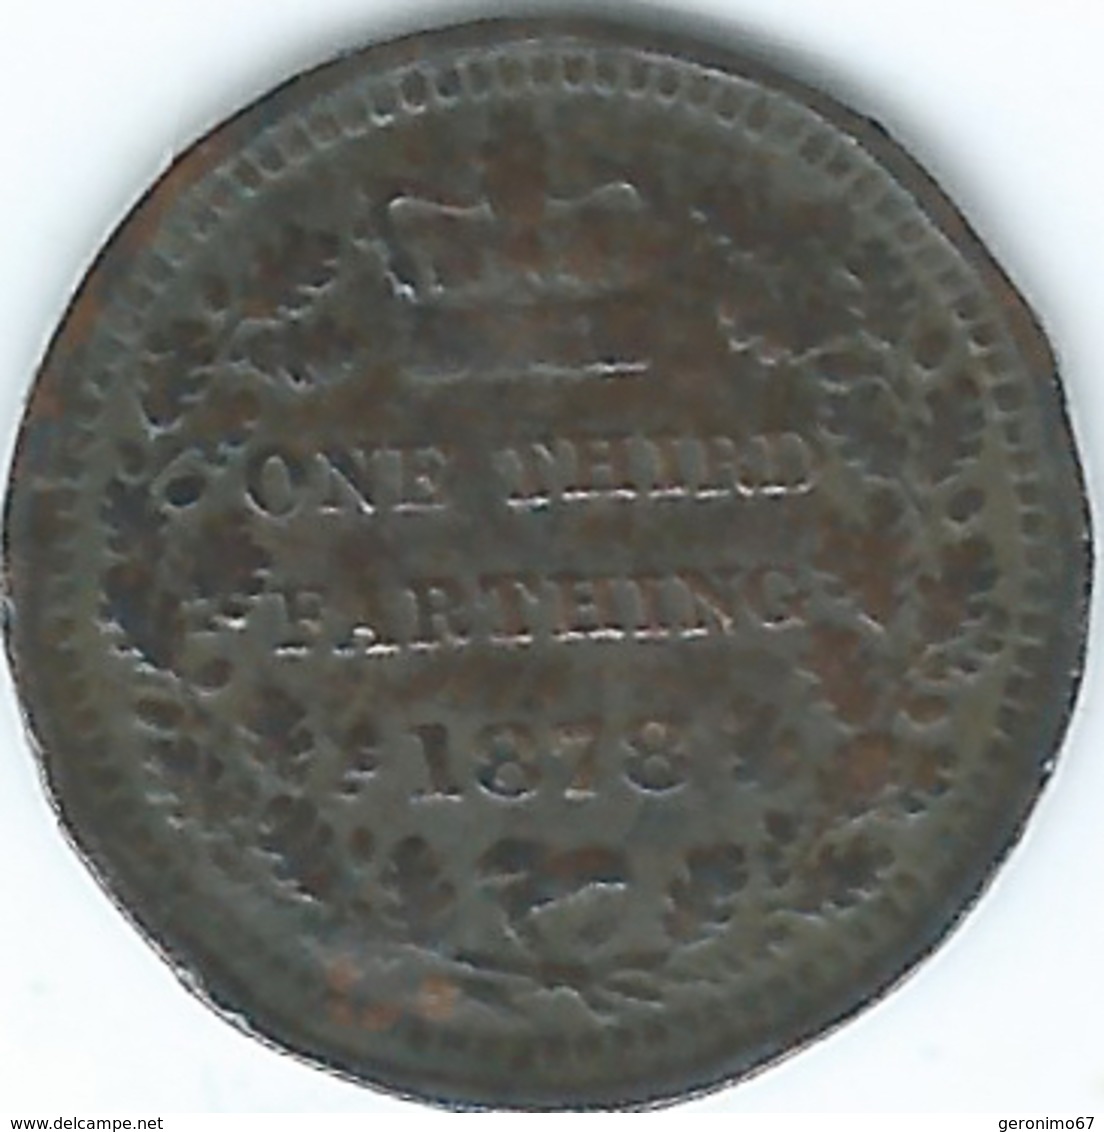 United Kingdom / Great Britain - 1878  - ⅓ Farthing / ¹⁄₁₂ Penny - Victoria - KM750 - Struck For Use In Malta - A. 1/3 Farthing